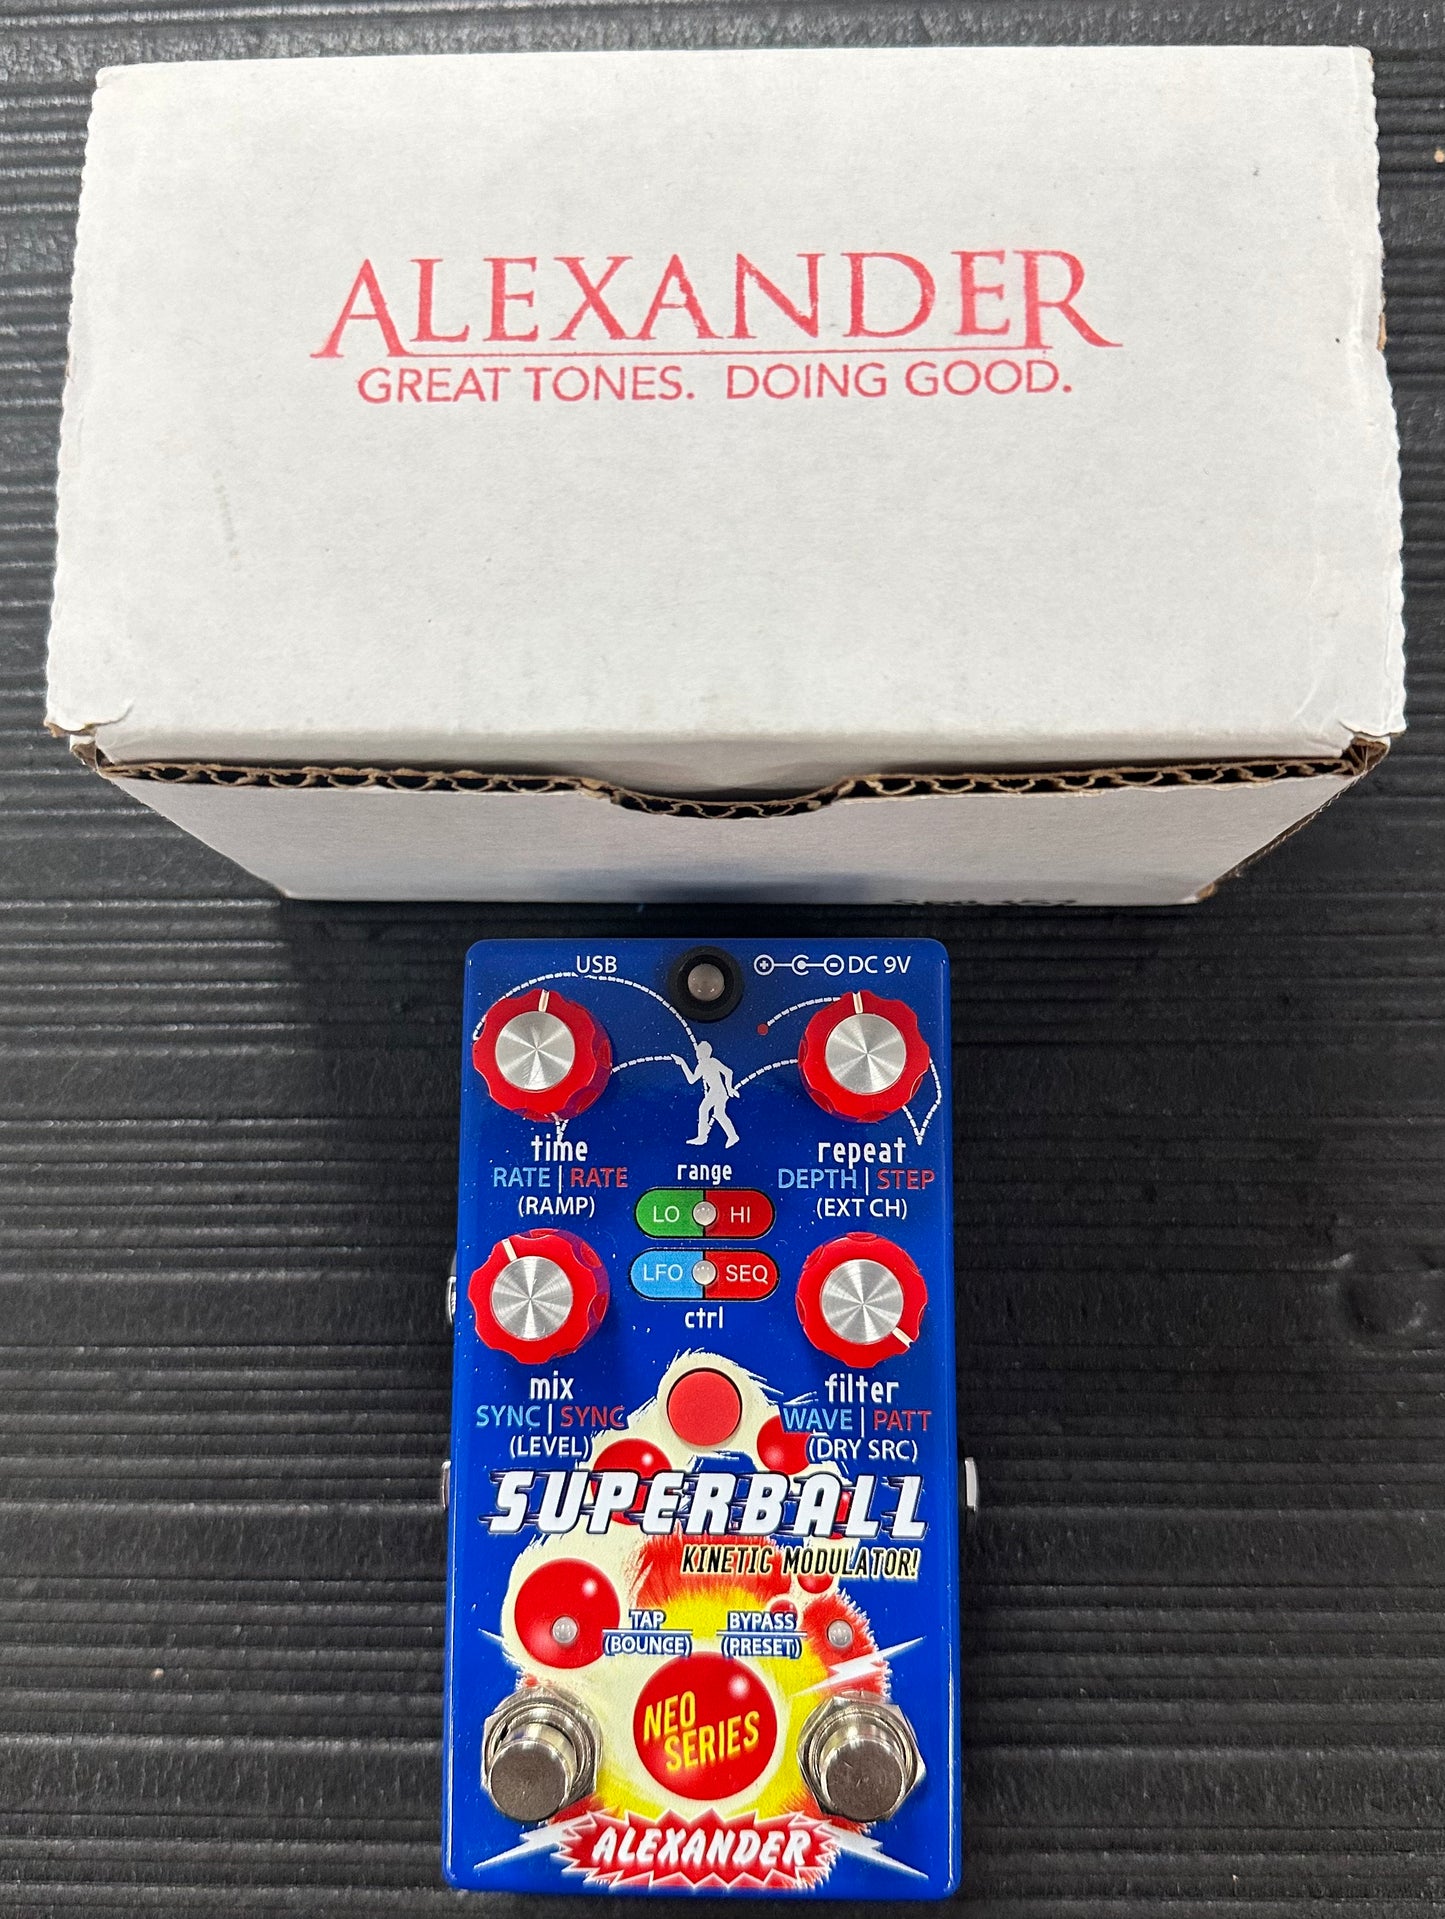 Top with box off Used Alexander Pedals Superball Kinetic Modulator w/box TSS3796